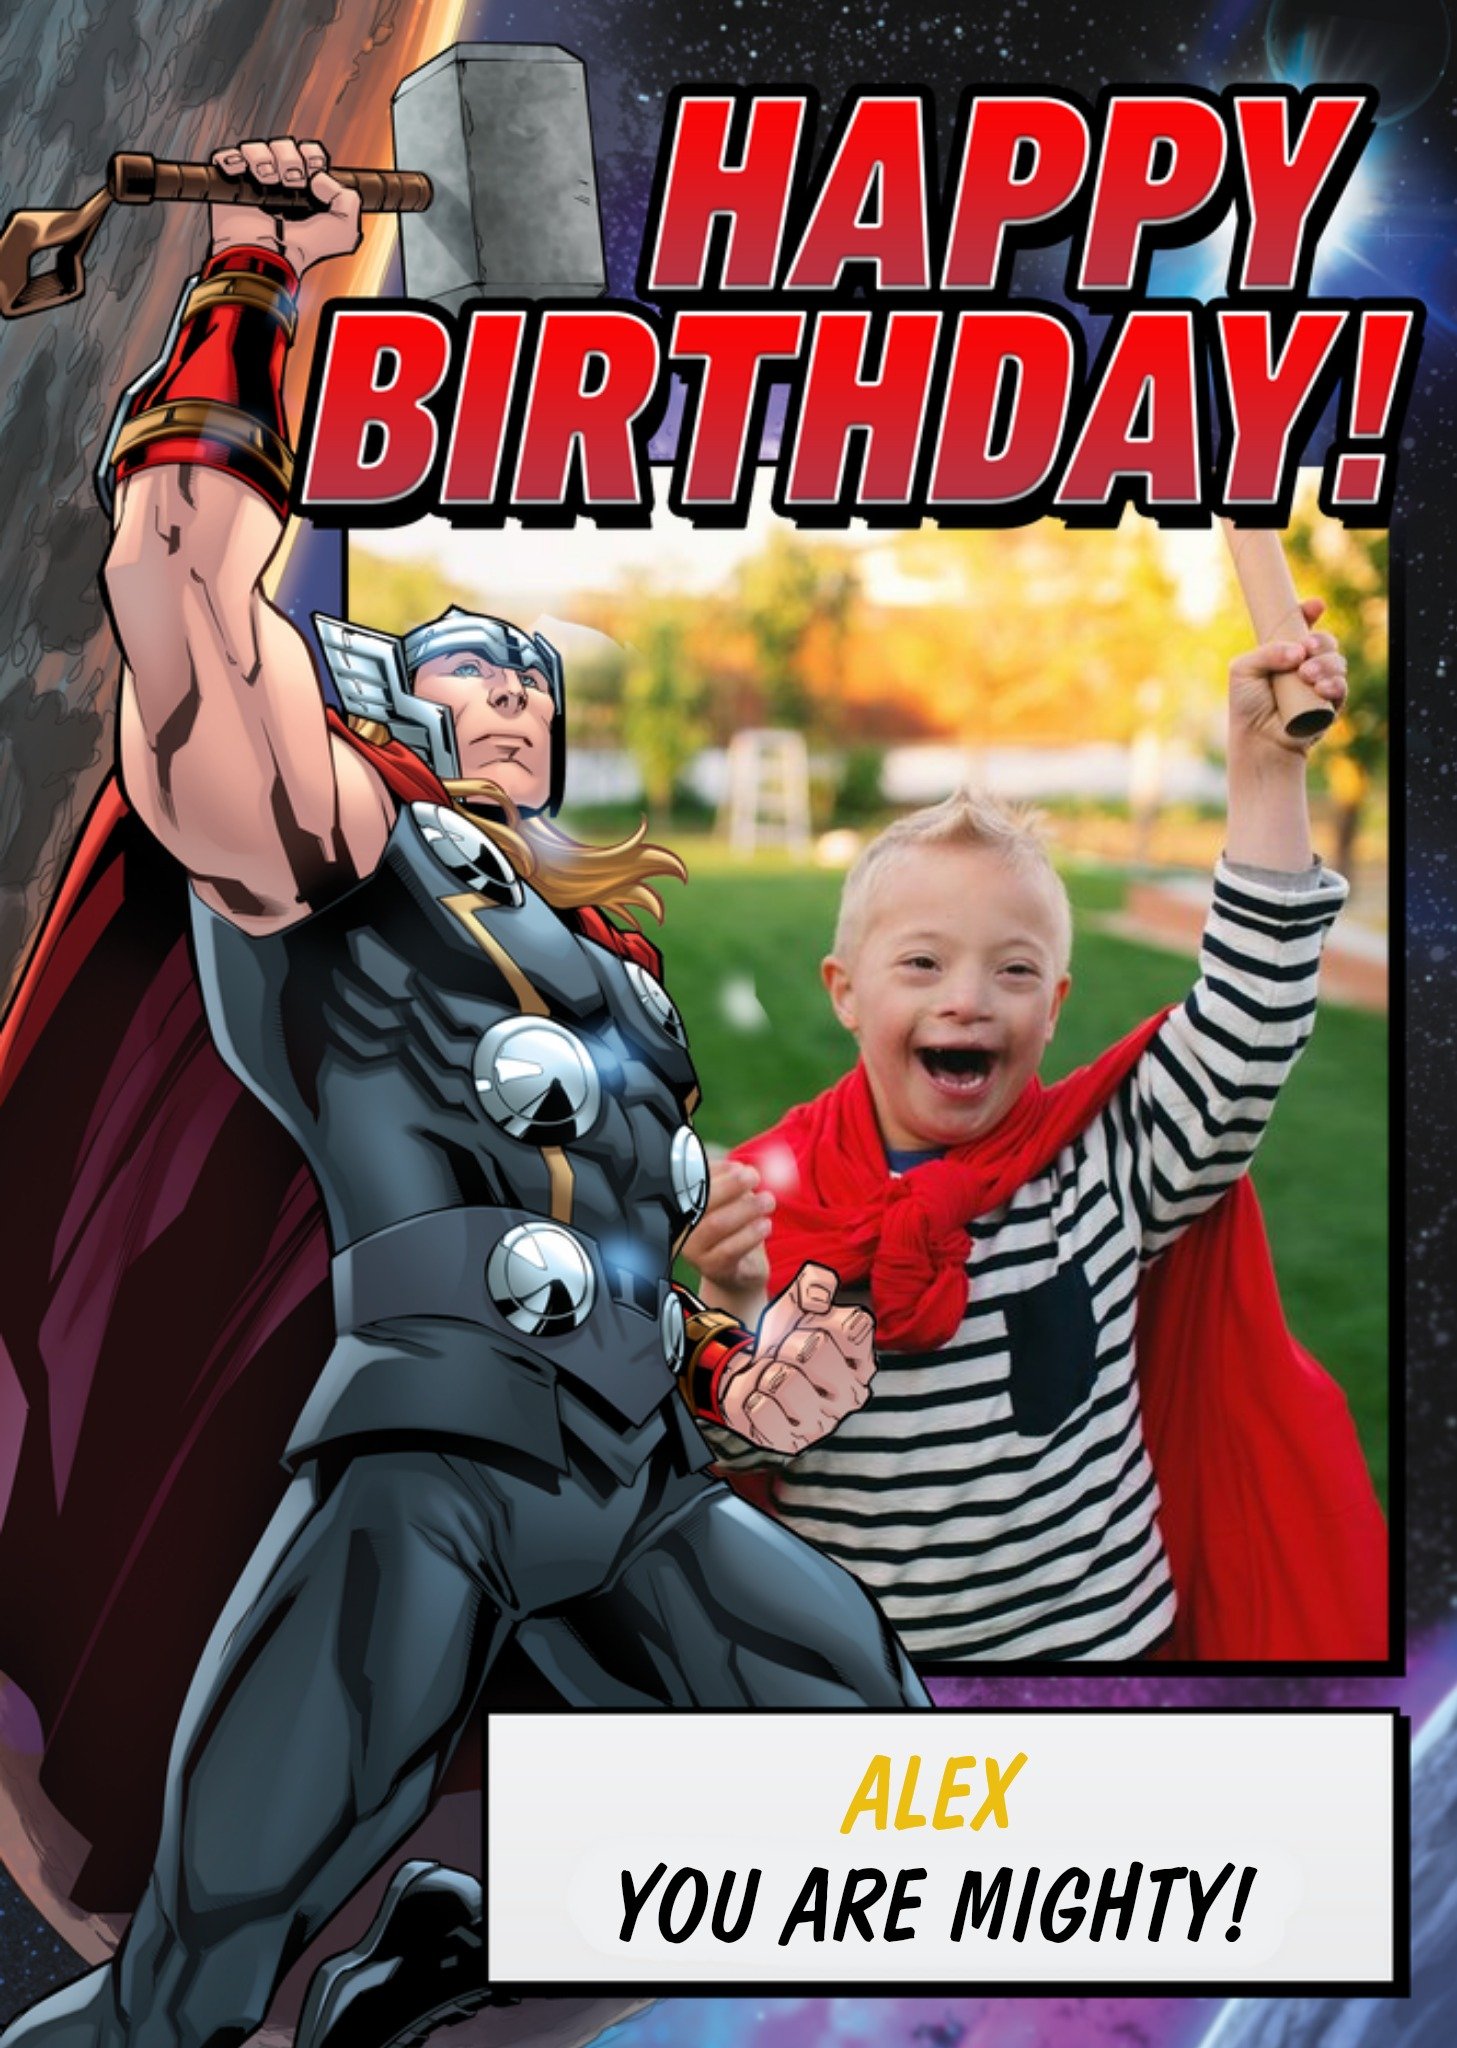 Marvel Thor You Are Mighty Avengers Birthday Photo Upload Card Ecard